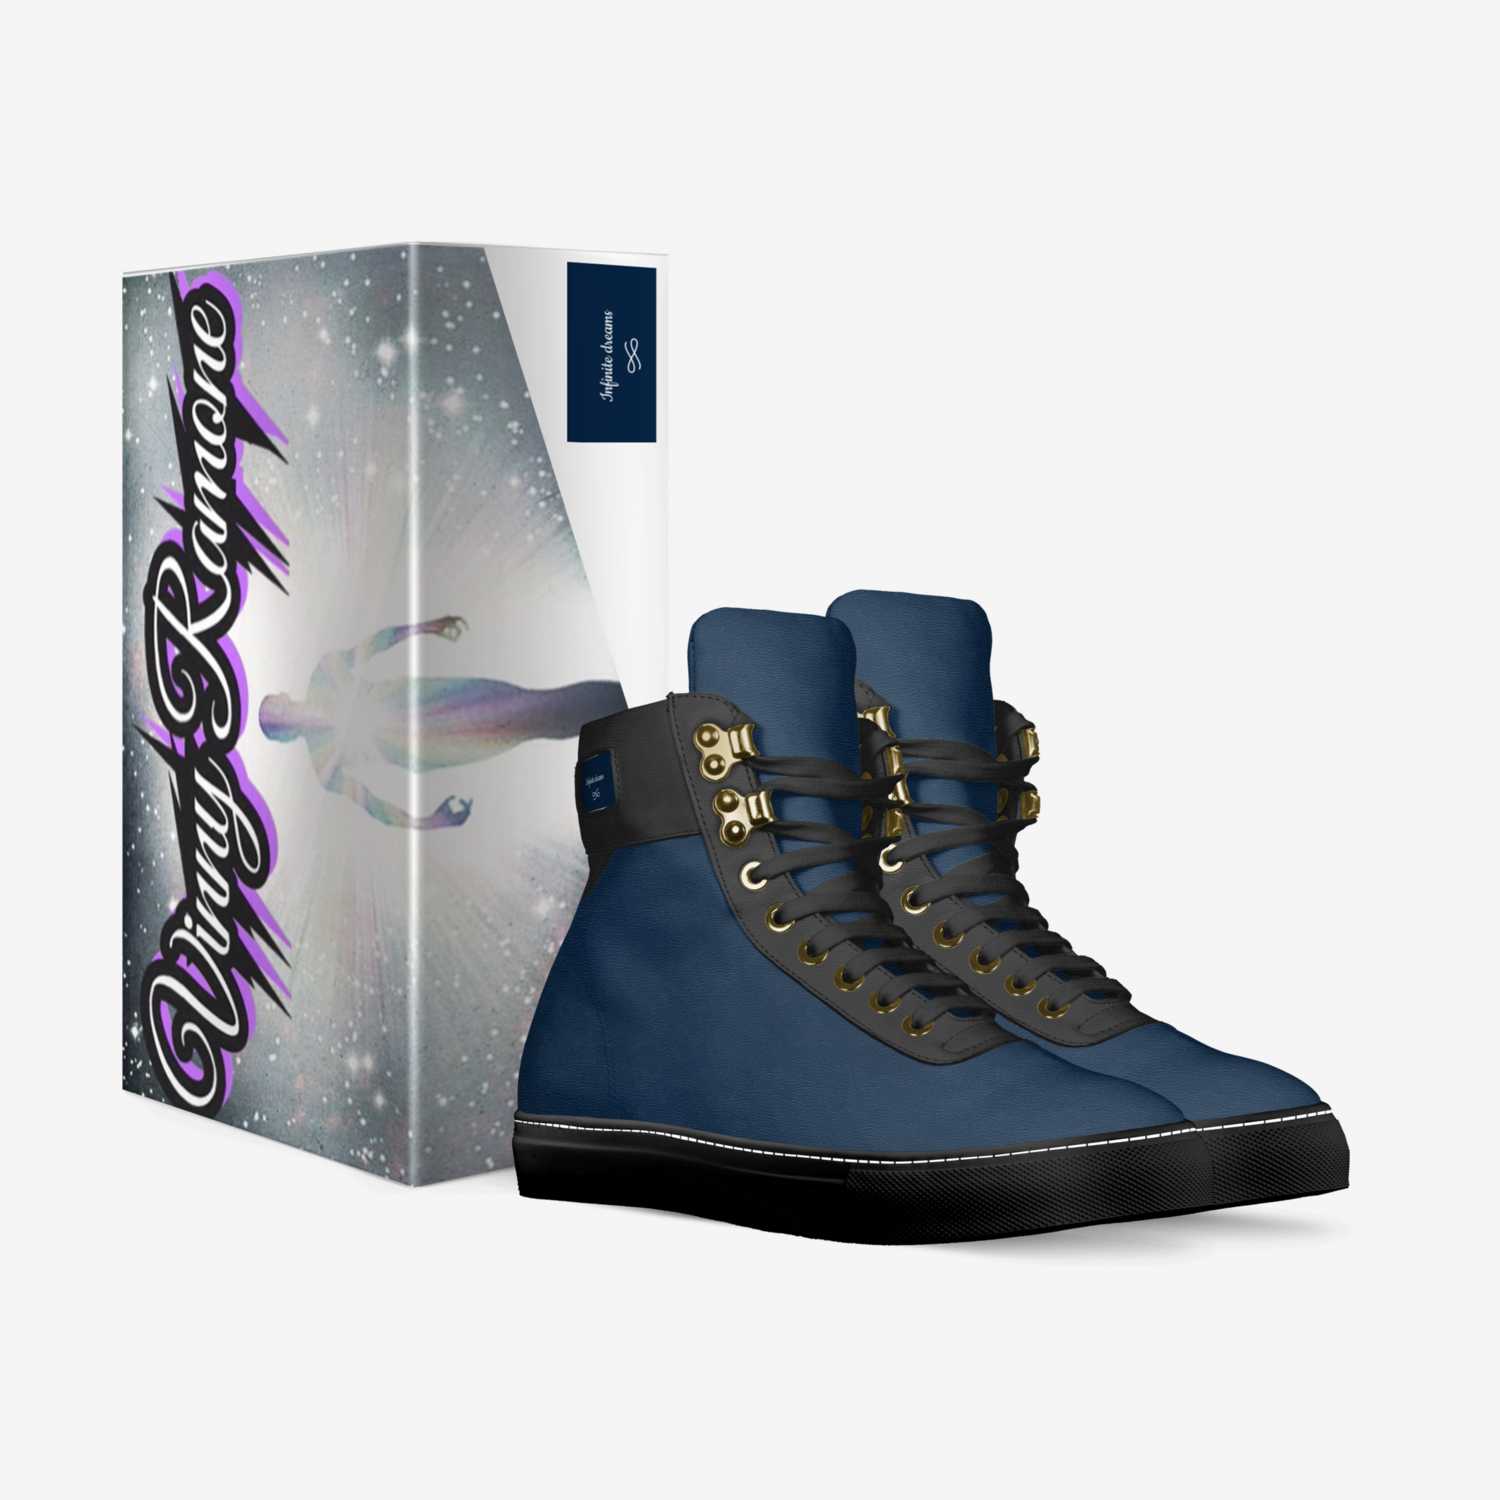 Infinite dreams  custom made in Italy shoes by Vinny Ramone | Box view